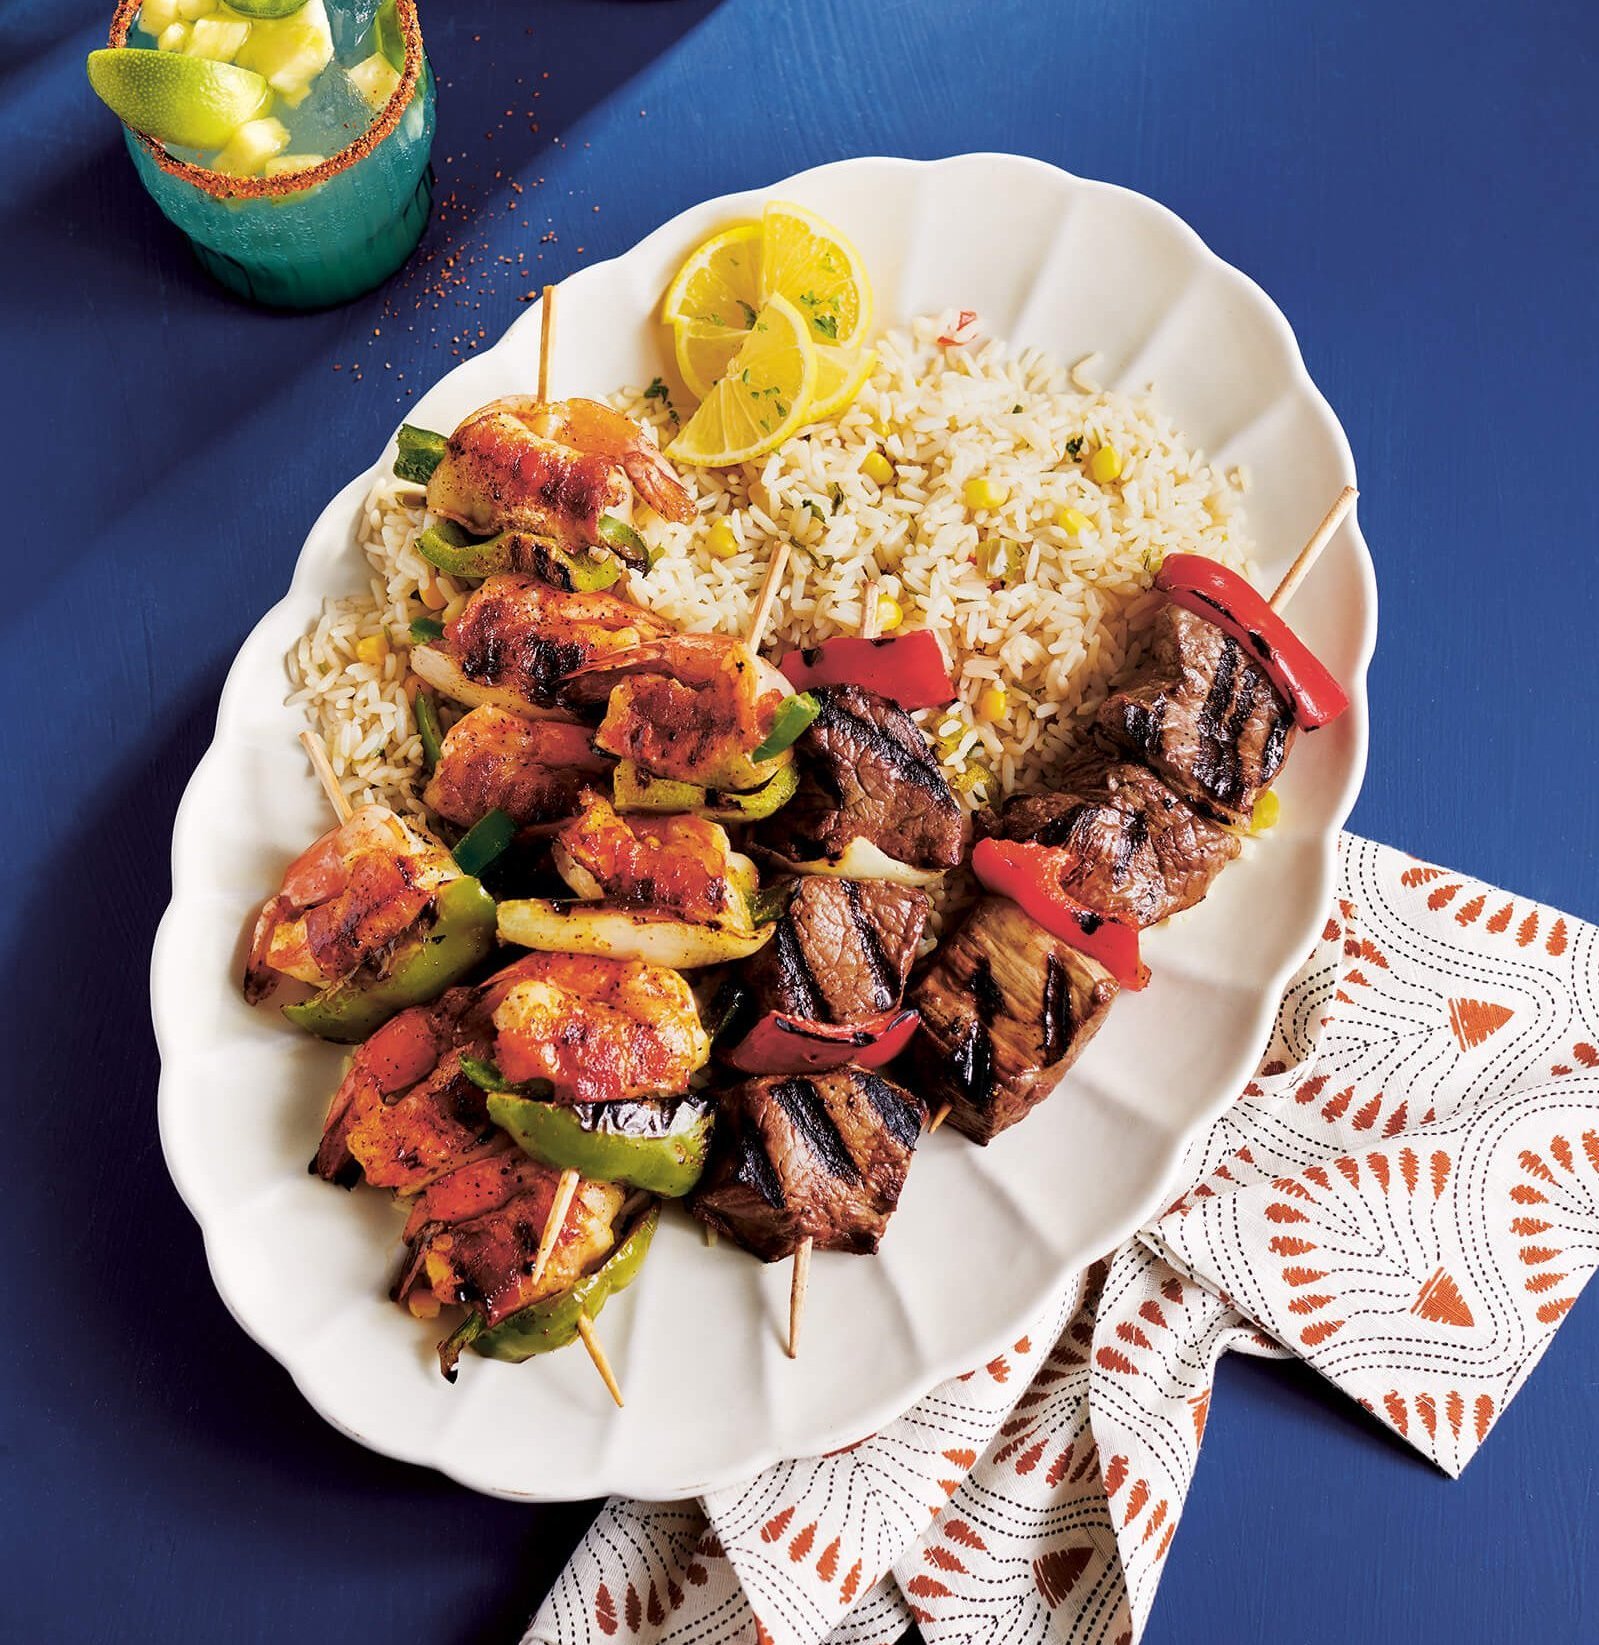 Grilled beef and shrimp skewers with drinks nearby on a bright blue surface